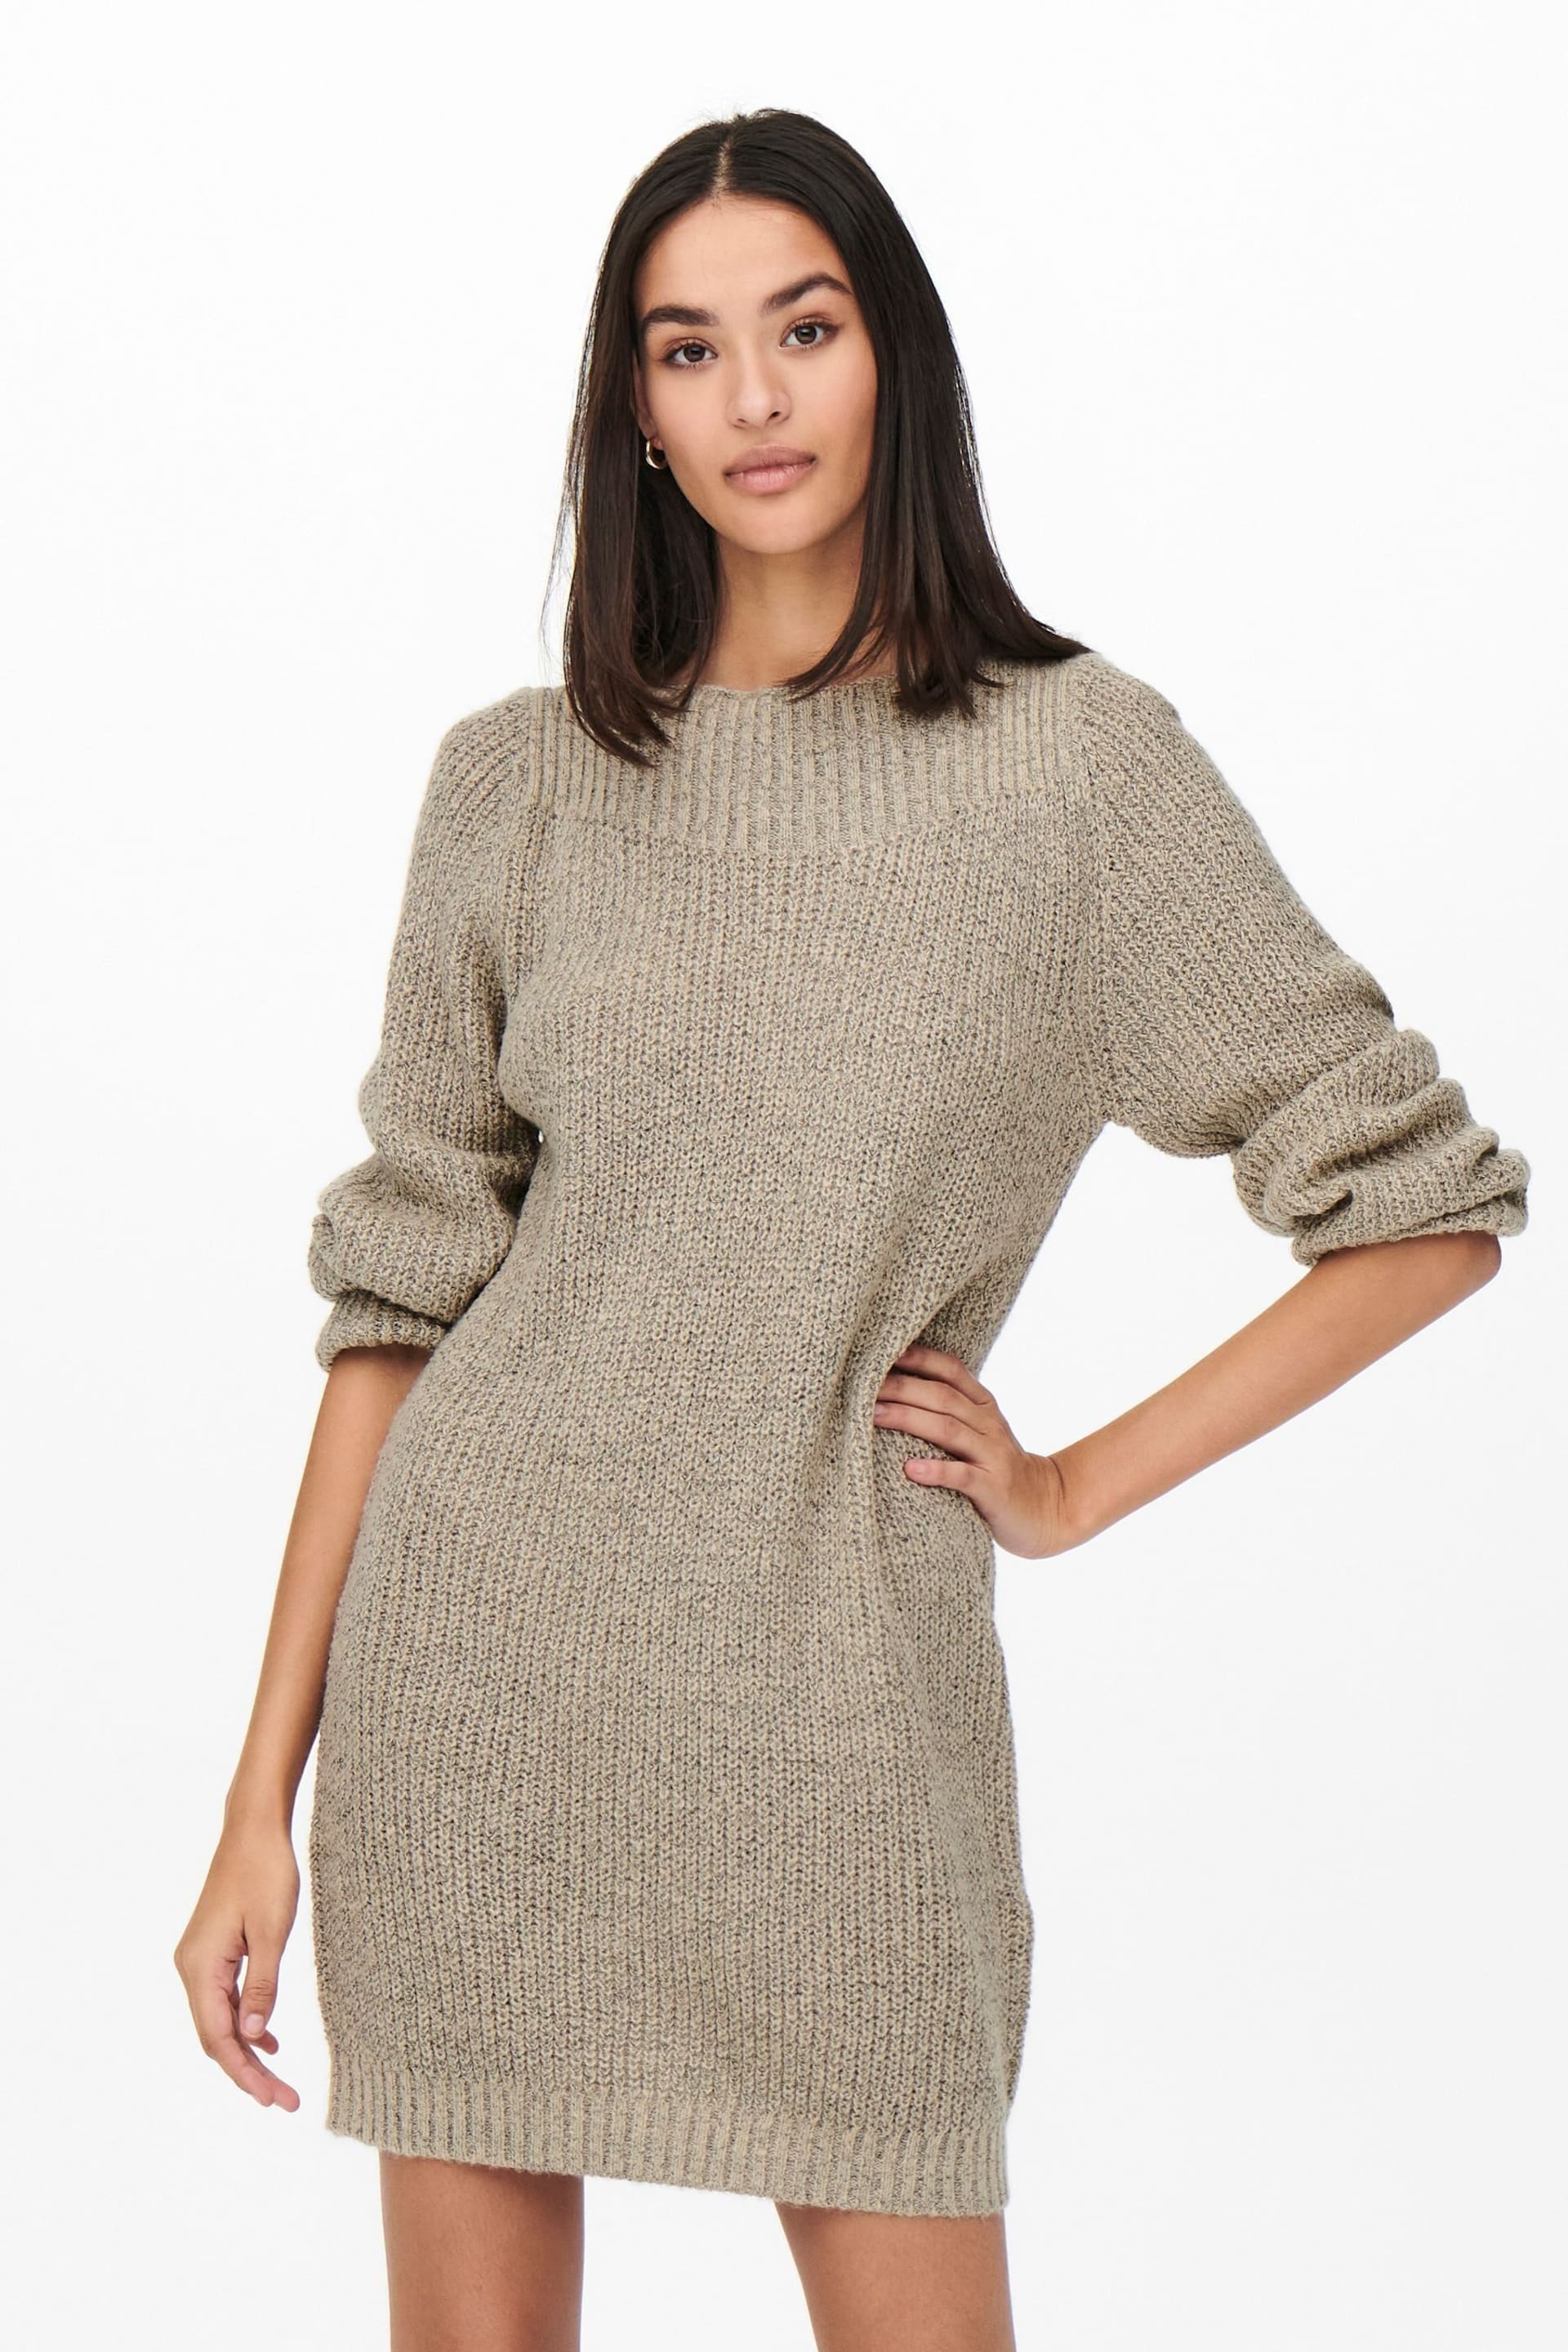 JDY Natural Knitted Dress - Image 1 of 7